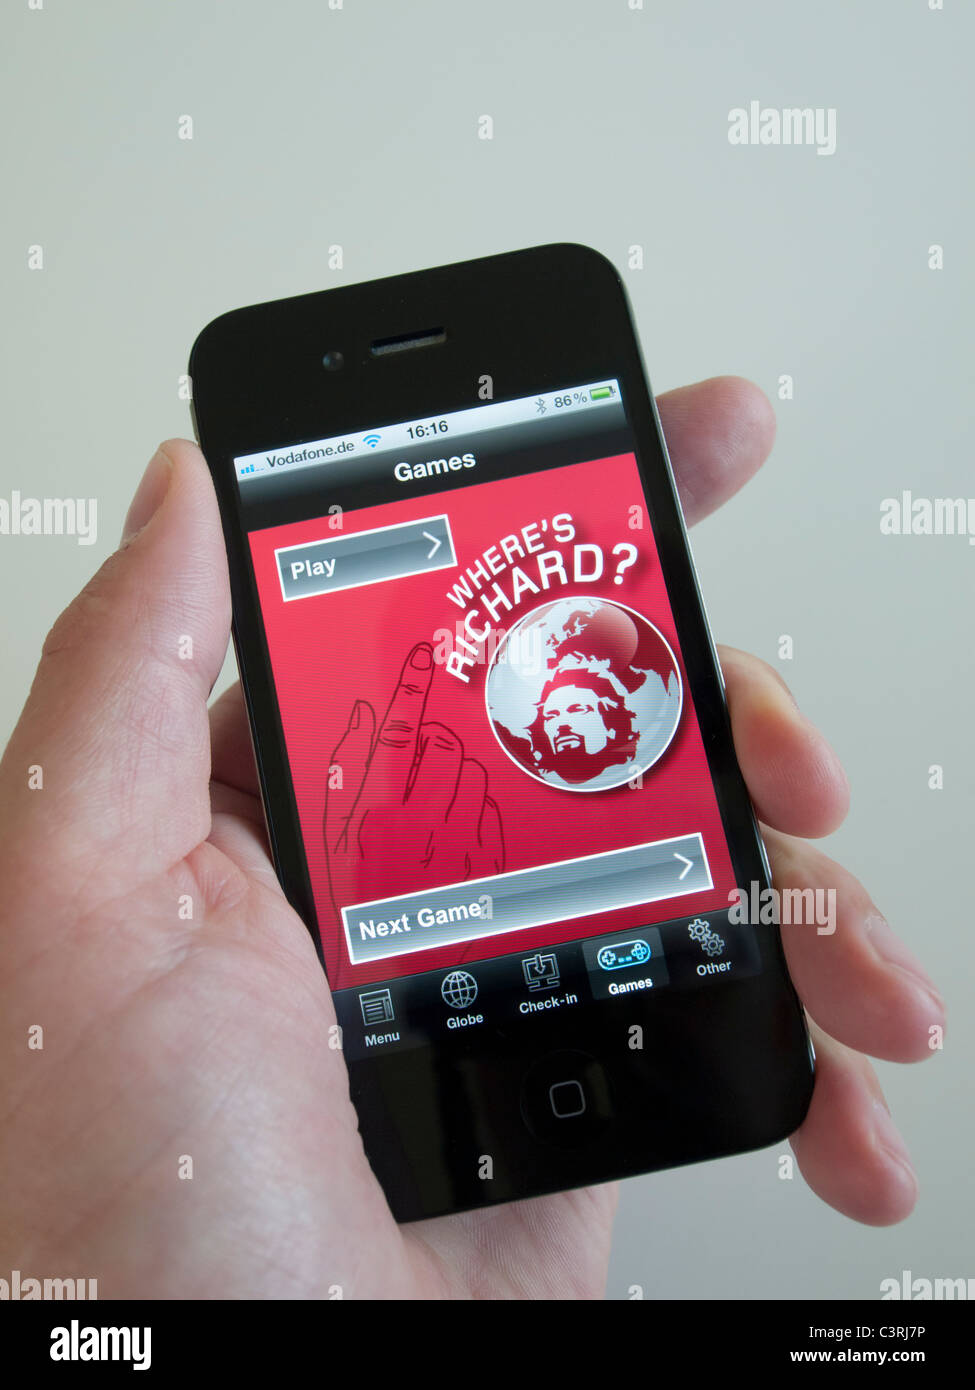 Playing game on Virgin airline app on an iPhone 4G smart phone Stock Photo